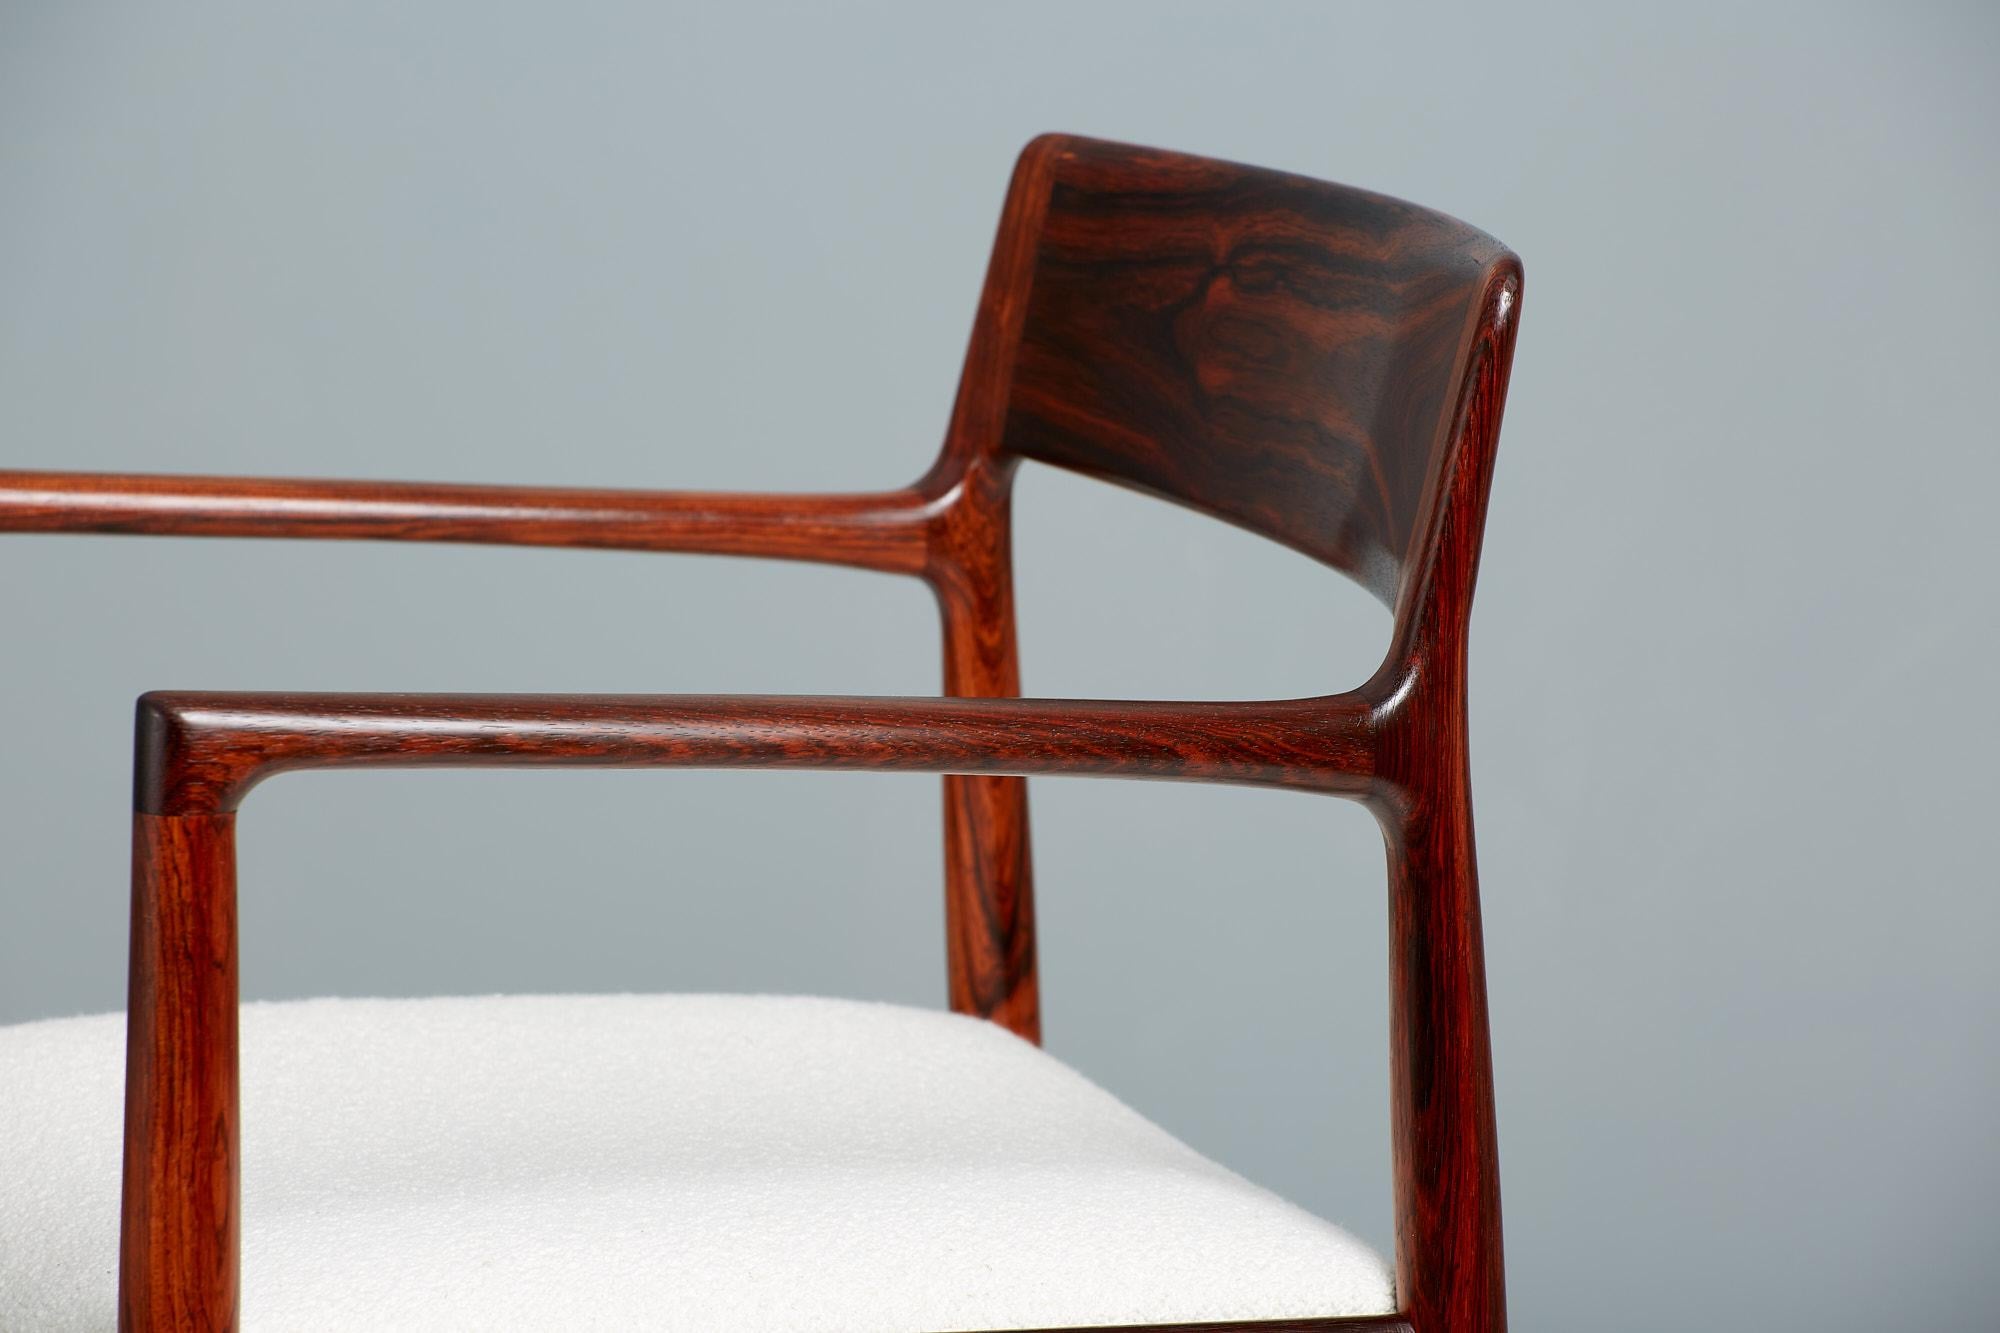 Rosewood armchair produced by Norgaard Mobelfabrik in Denmark and designed by company owner Johannes Norgaard. The frame is made from exquisitely grained solid rosewood that remains in immaculate condition. The seat is newly reupholstered in Chase